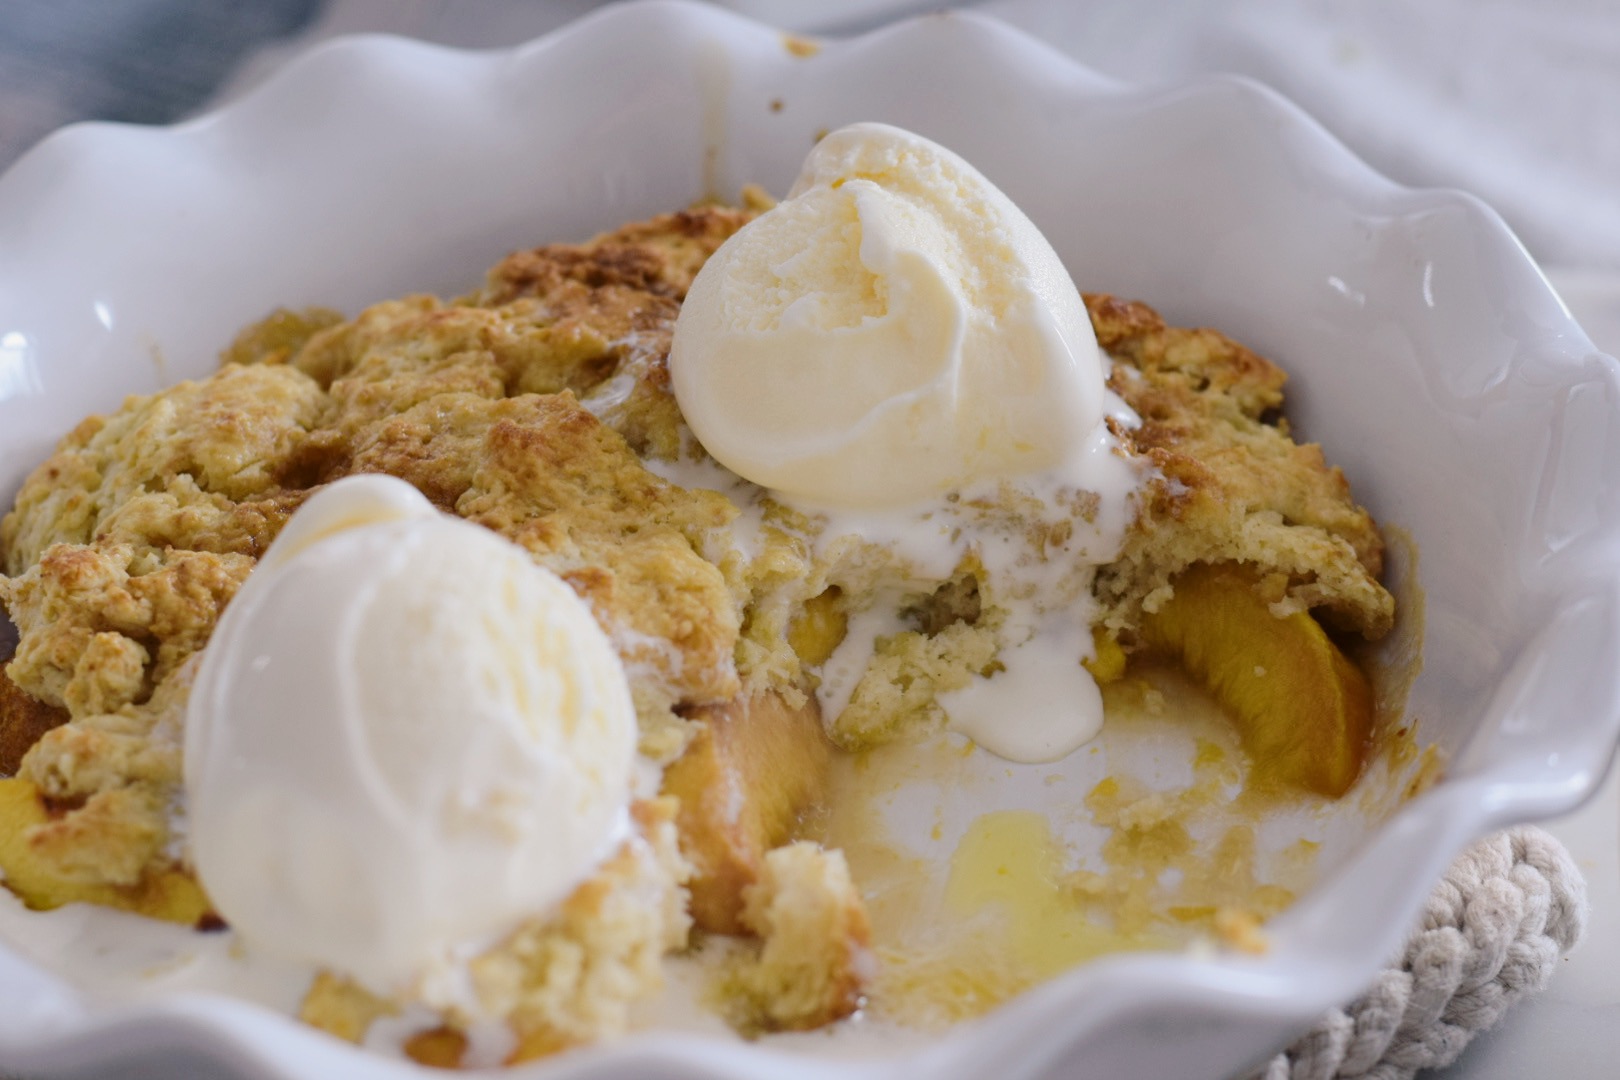 biscuit-top peach cobbler in a pie dish with ice cream